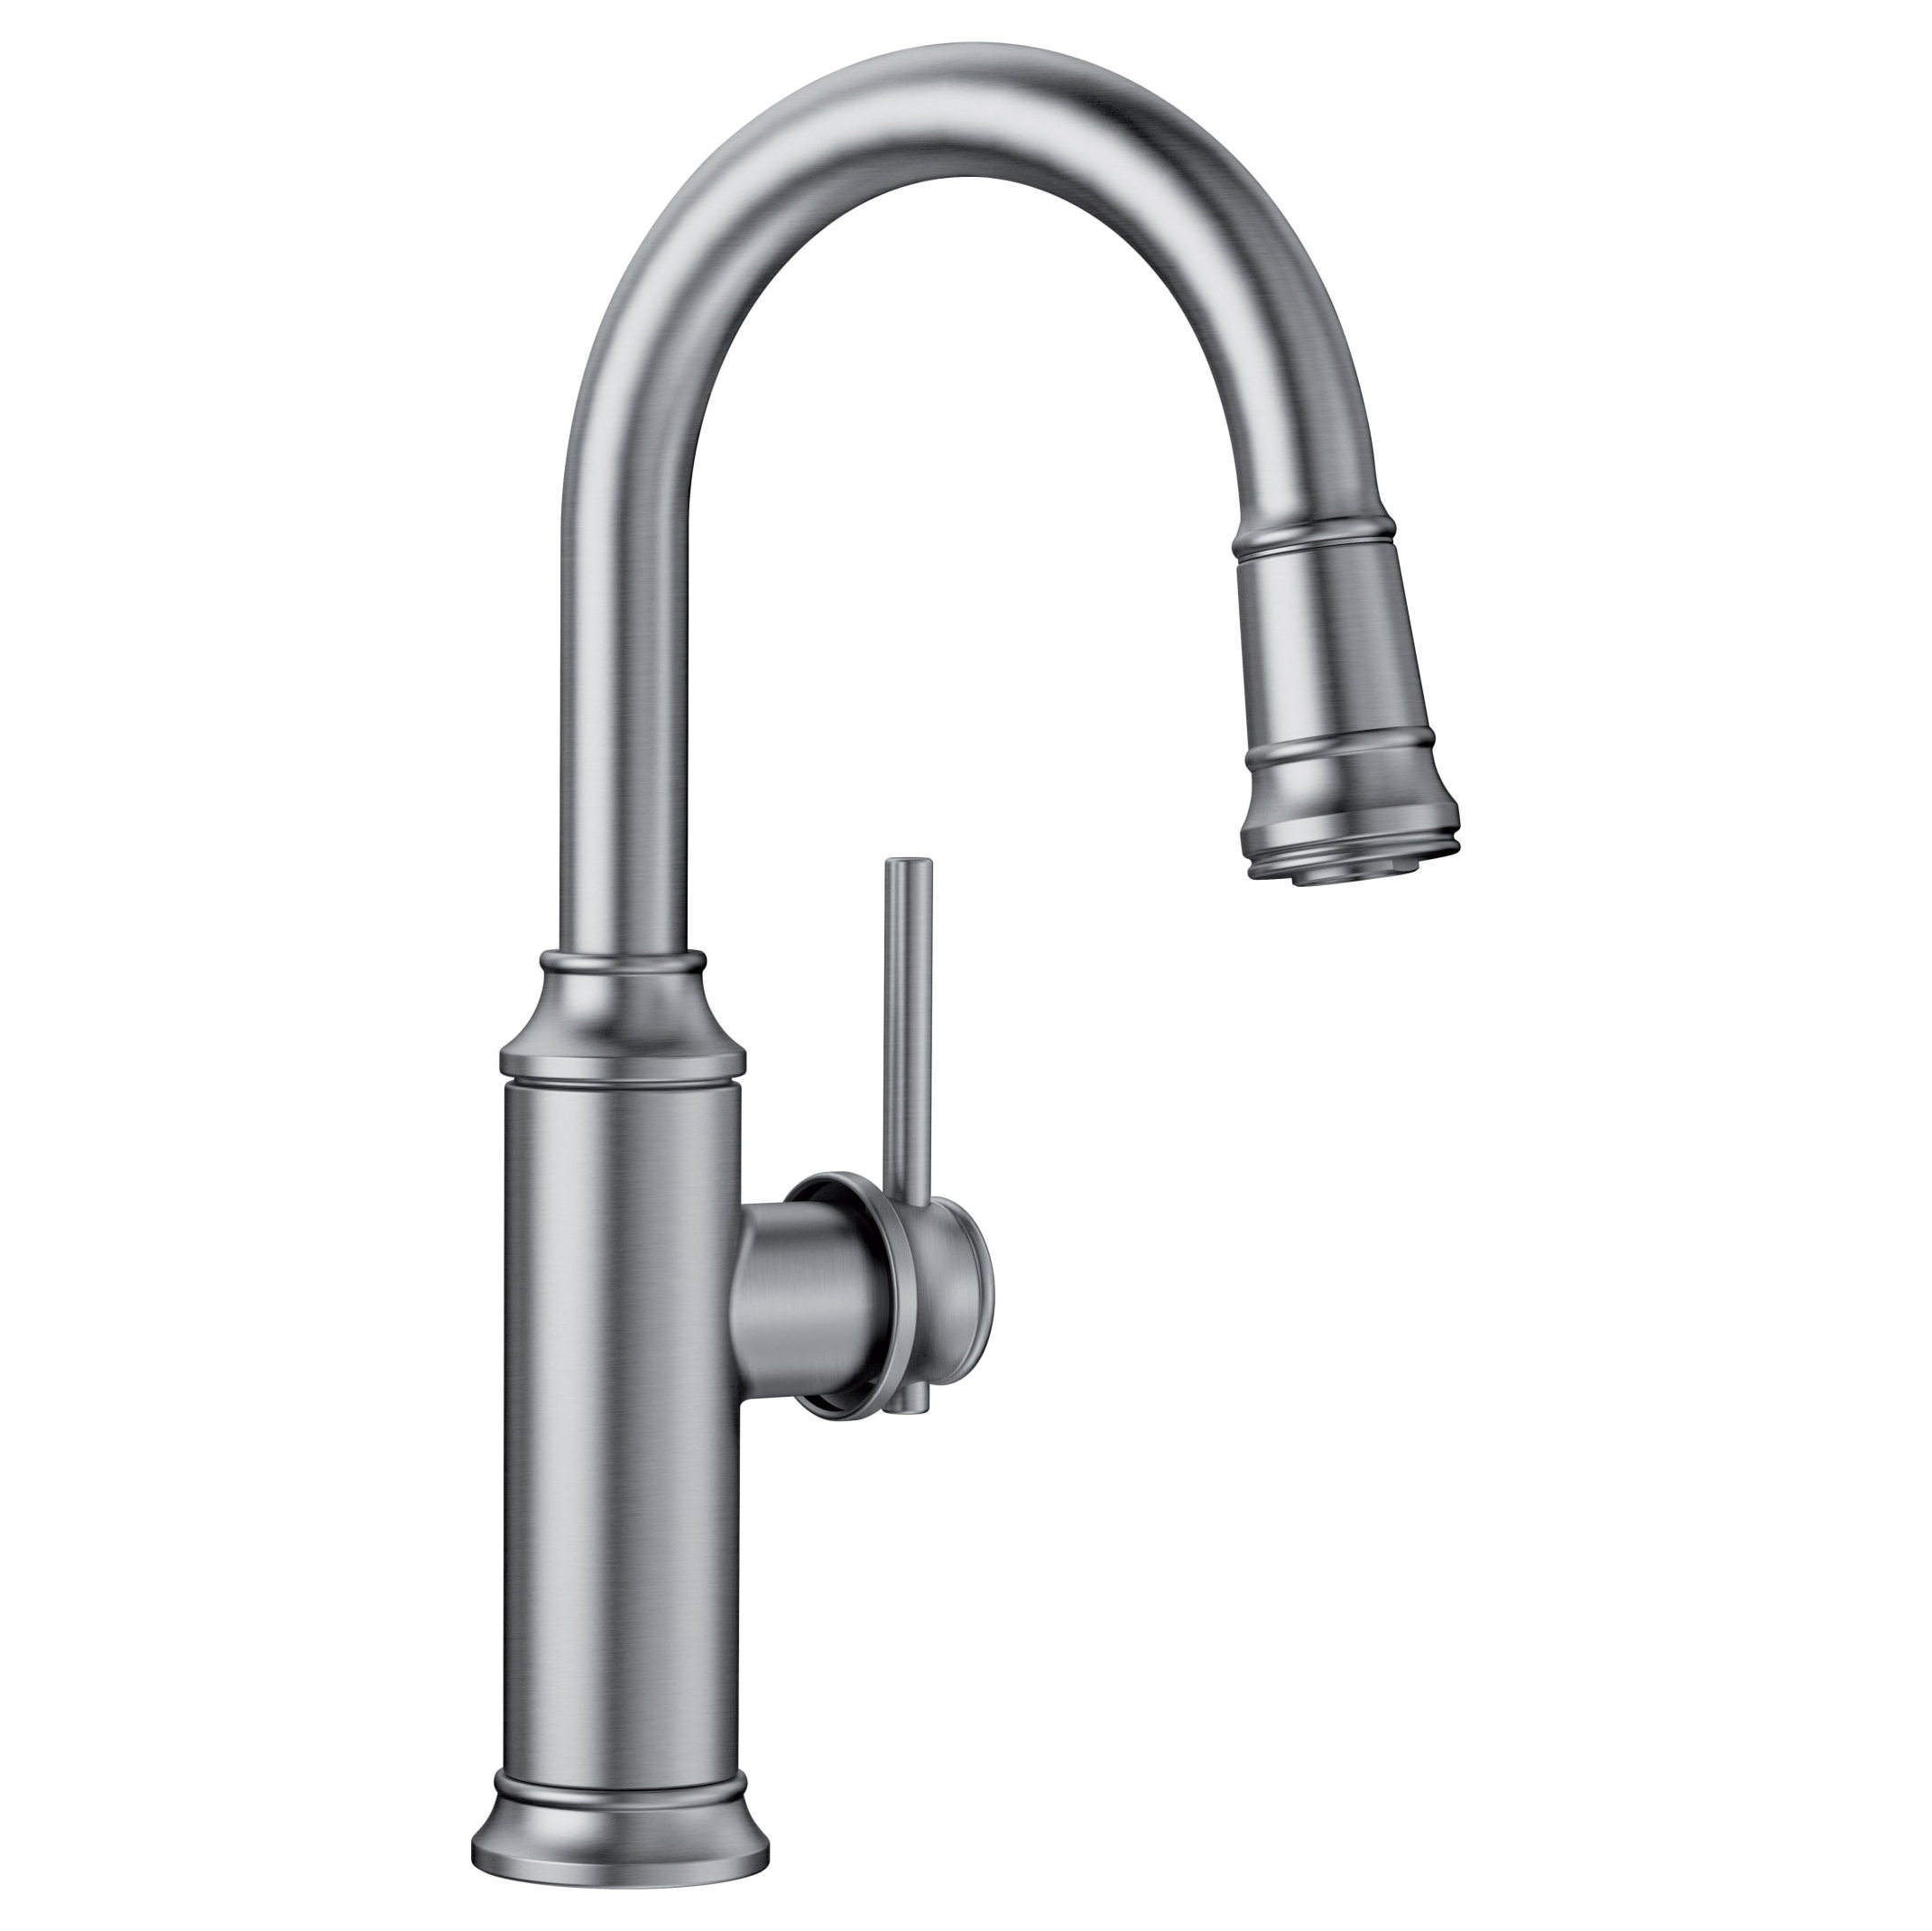 Empressa 1-Hole Pull-Down Spray Bar Faucet in PVD Steel